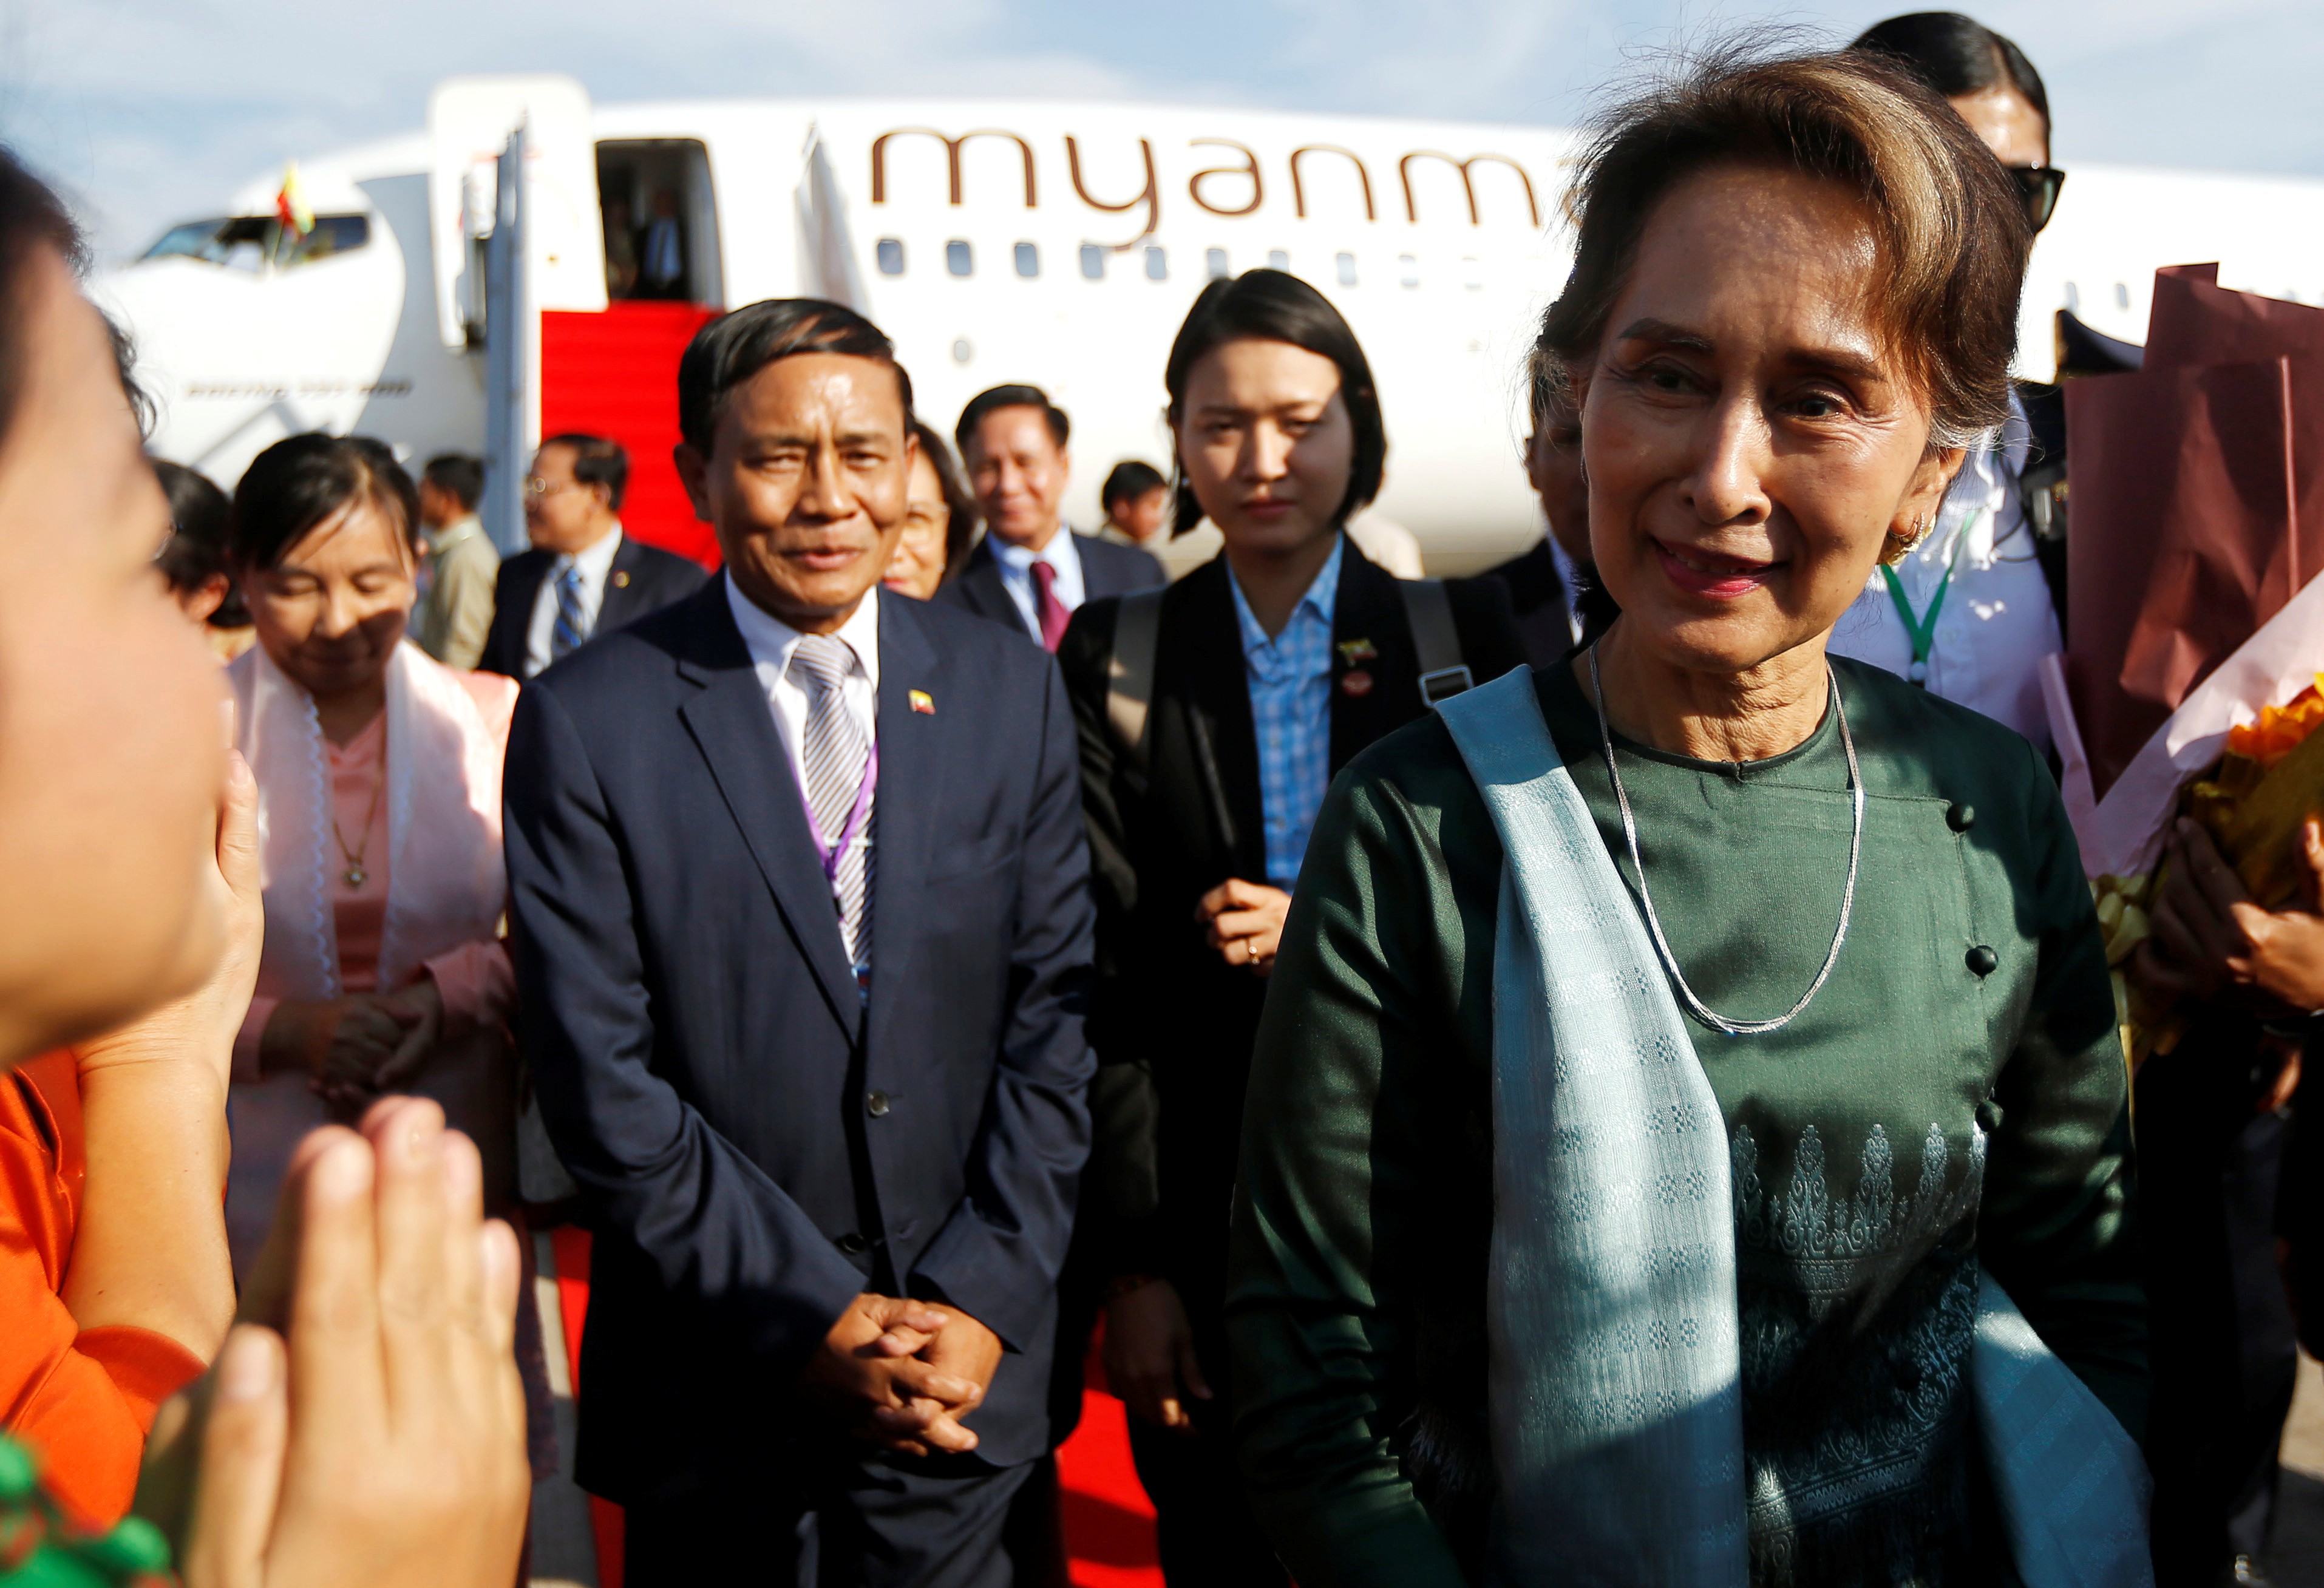 Myanmar’s State Counsellor Aung San Suu Kyi arrives at Phnom Penh International Airport in Cambodia on April 29. Photo: Reuters